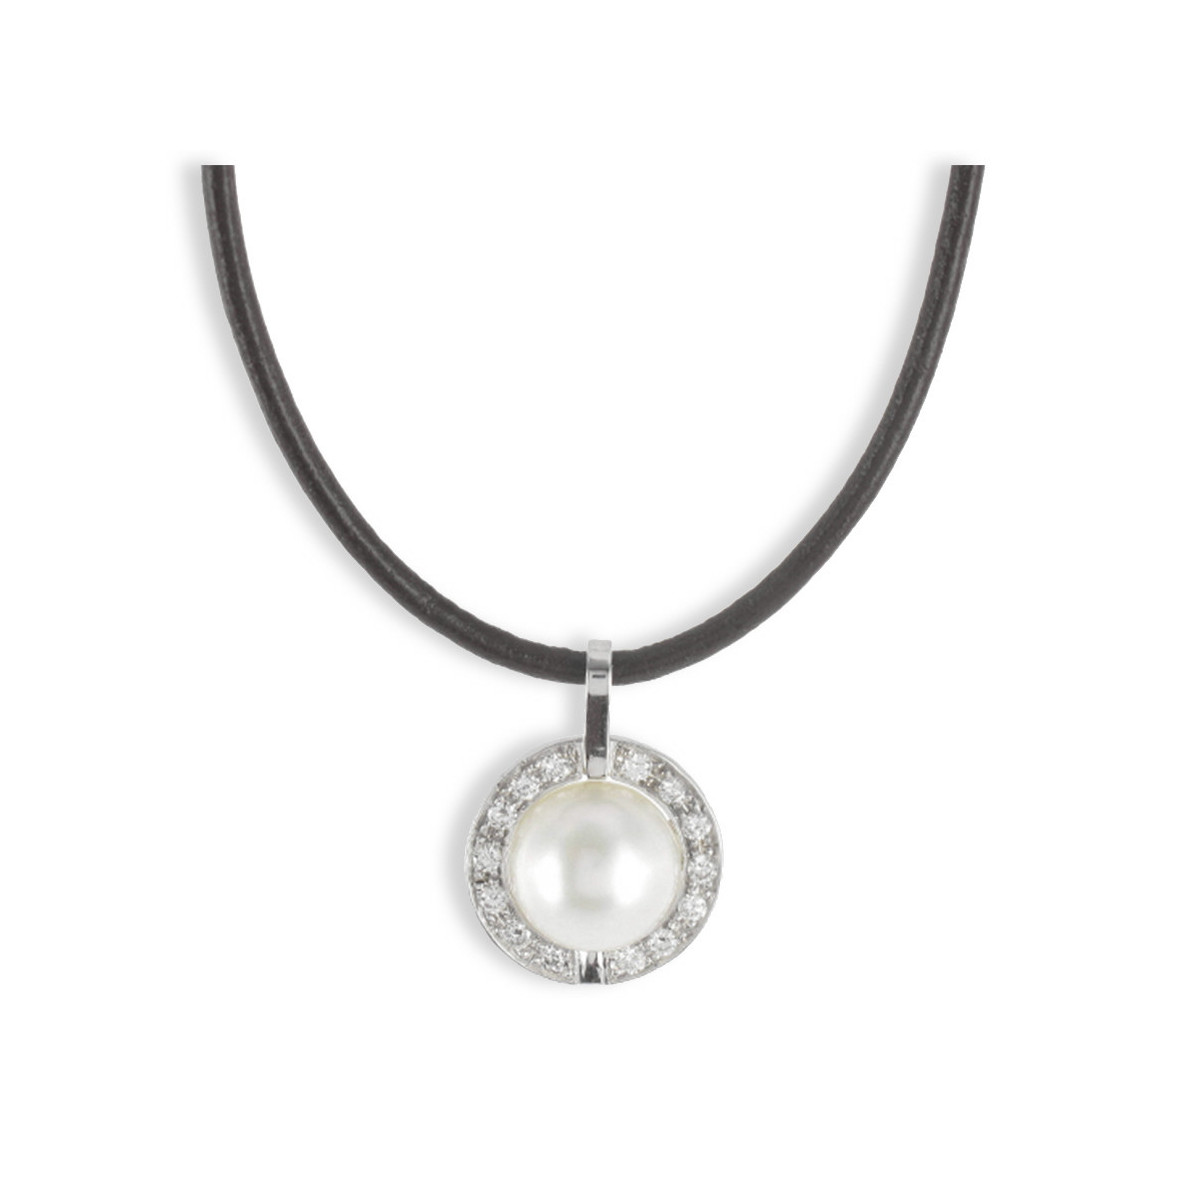 WHITE GOLD PEARL DIAMOND AND LEATHER NECKLACE